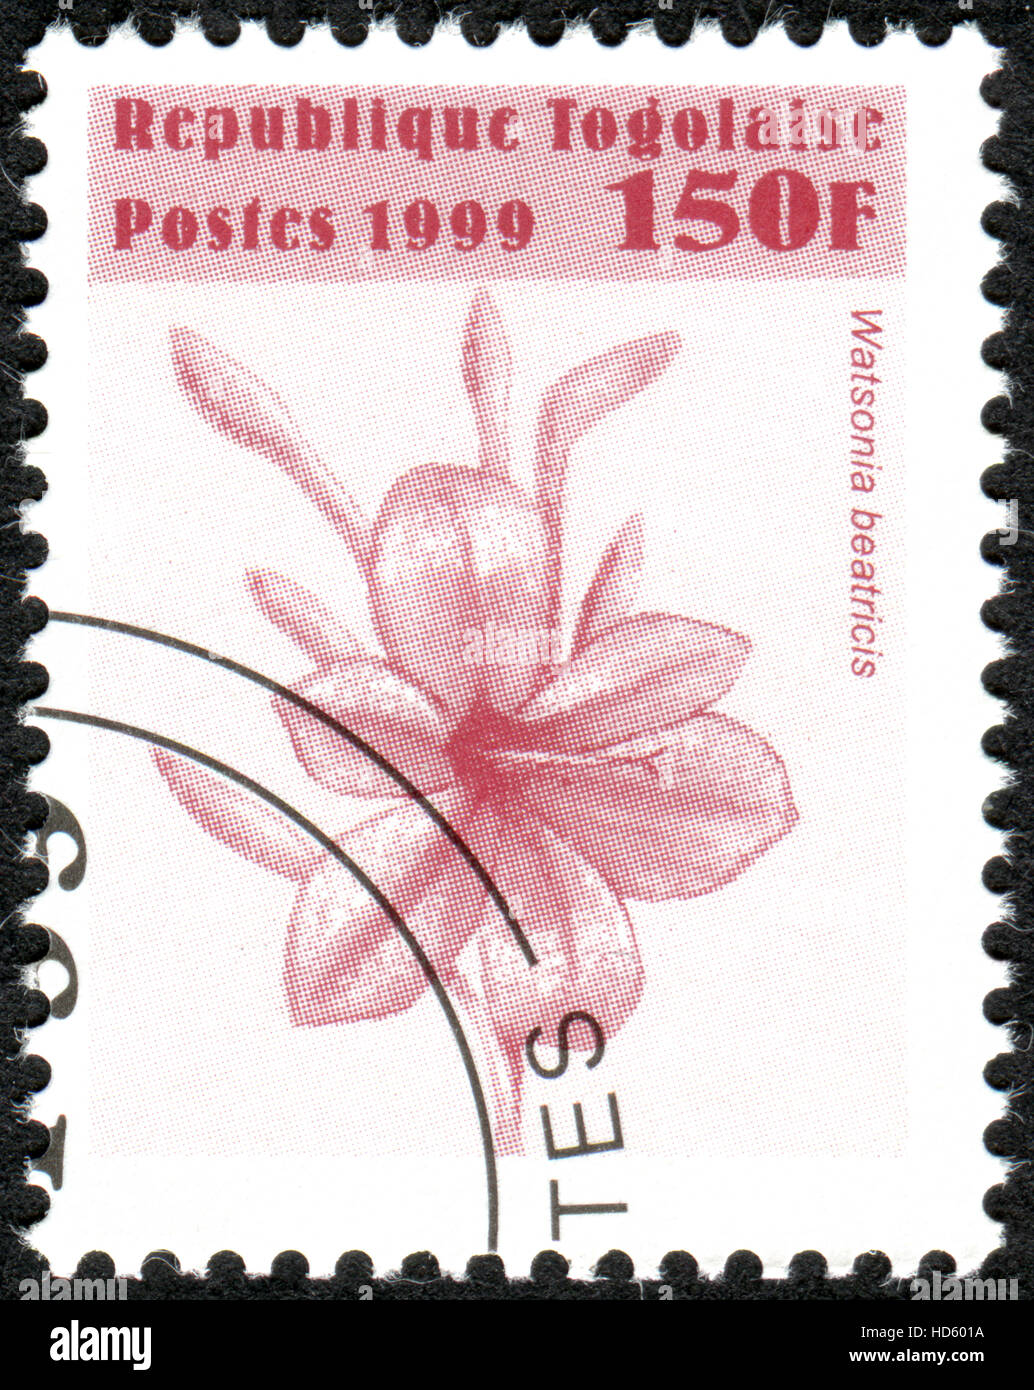 TOGO - CIRCA 1999: A stamp printed in Togo, shows the flower Watsonia beatricis, circa 1999 Stock Photo